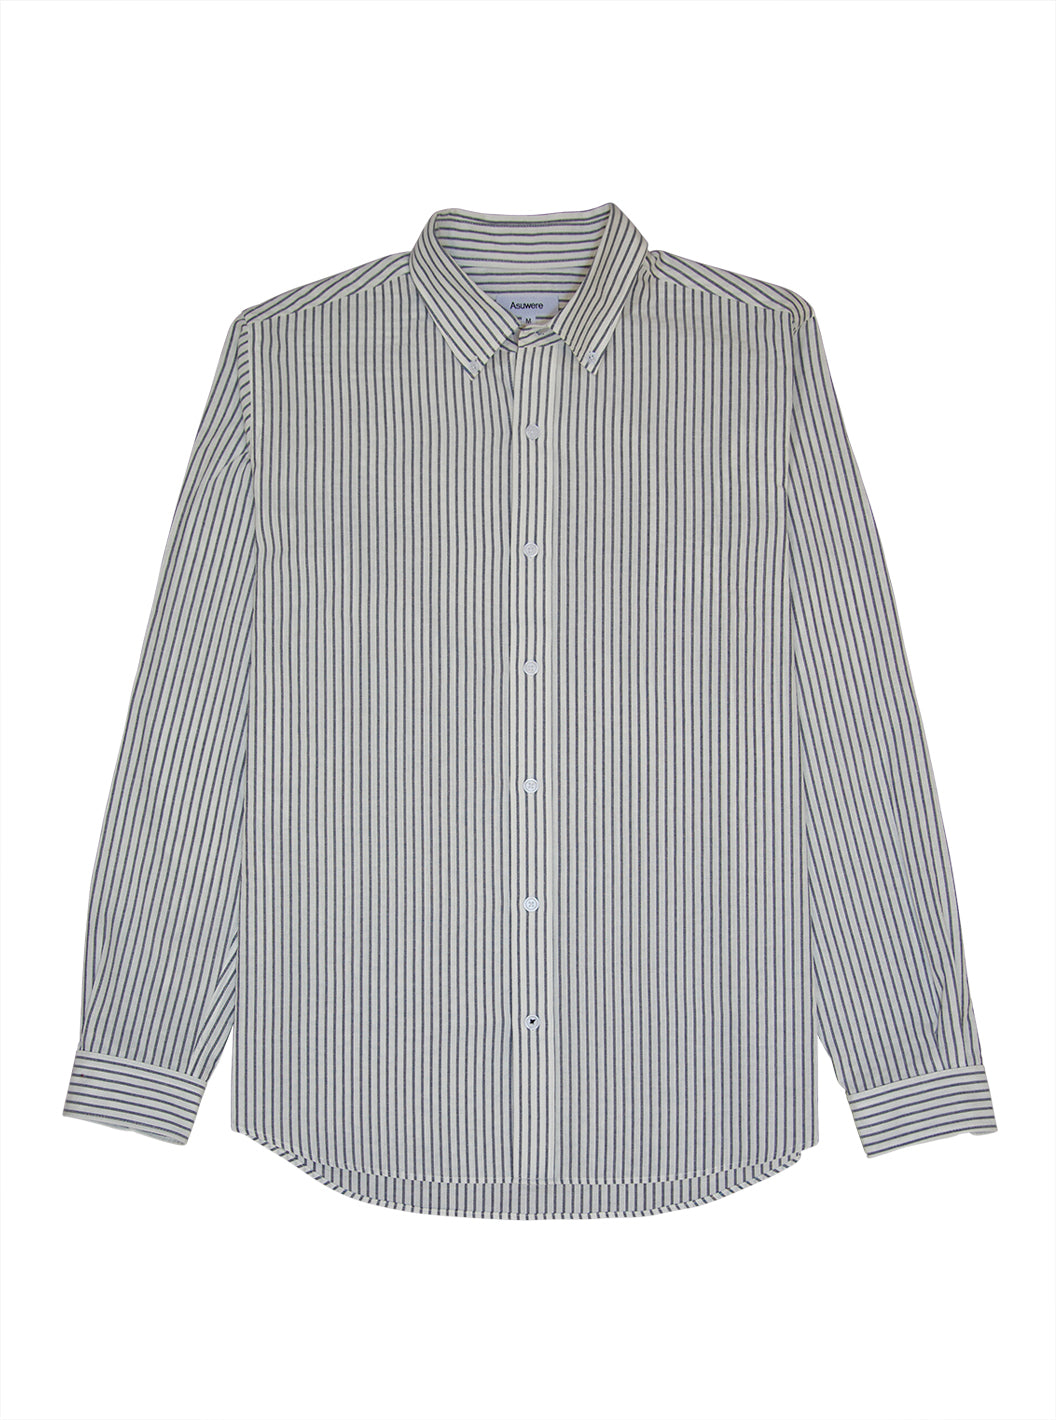 Front of navy stripe light cotton button down shirt against white background